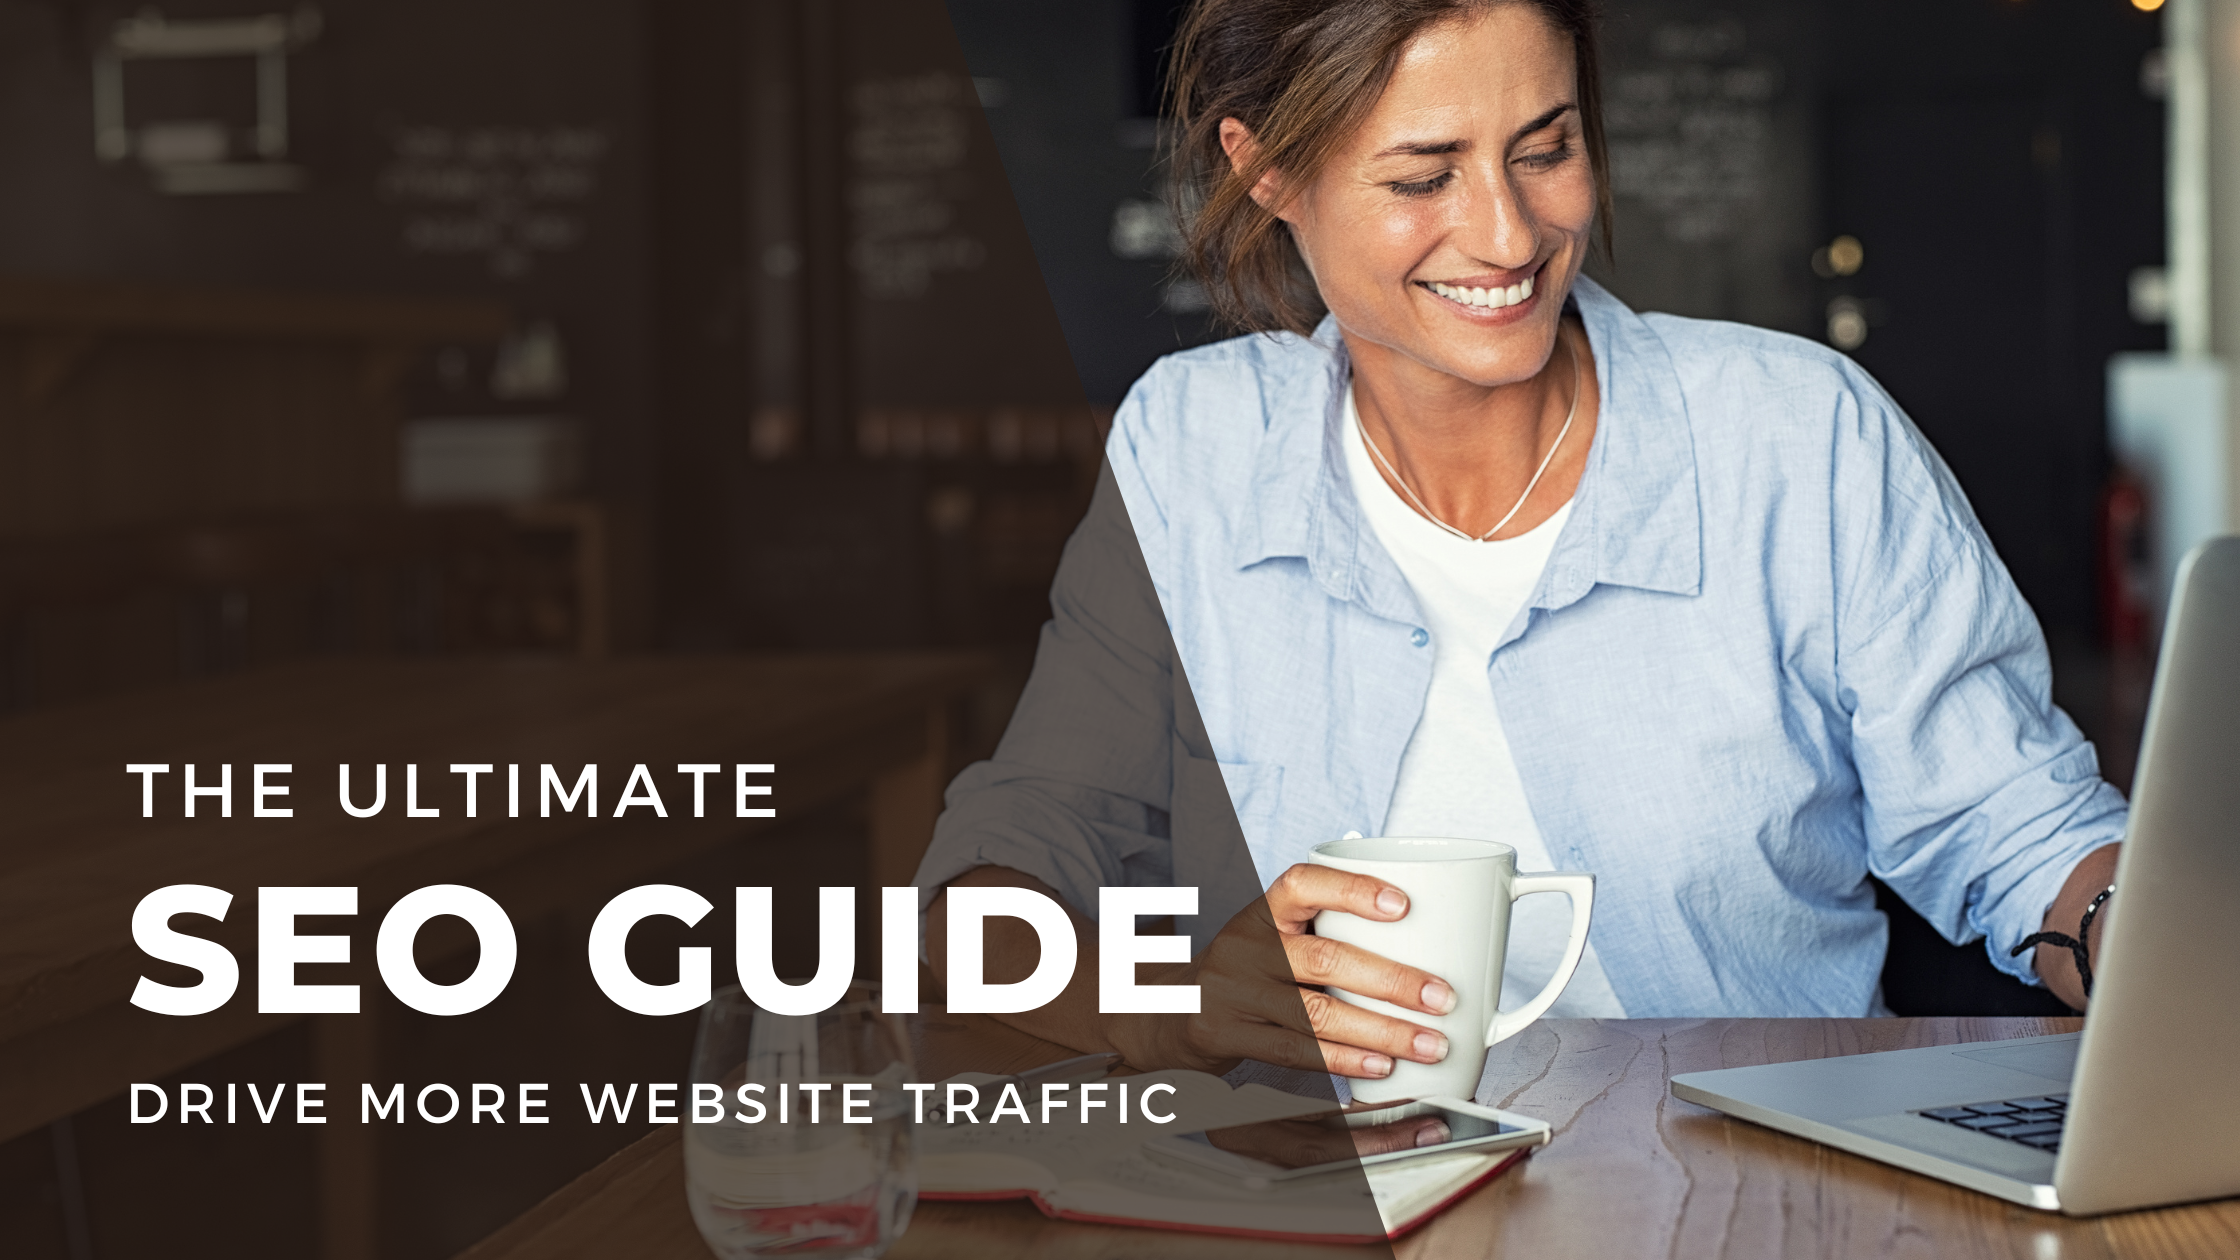 The Ultimate SEO Guide: Drive More Website Traffic